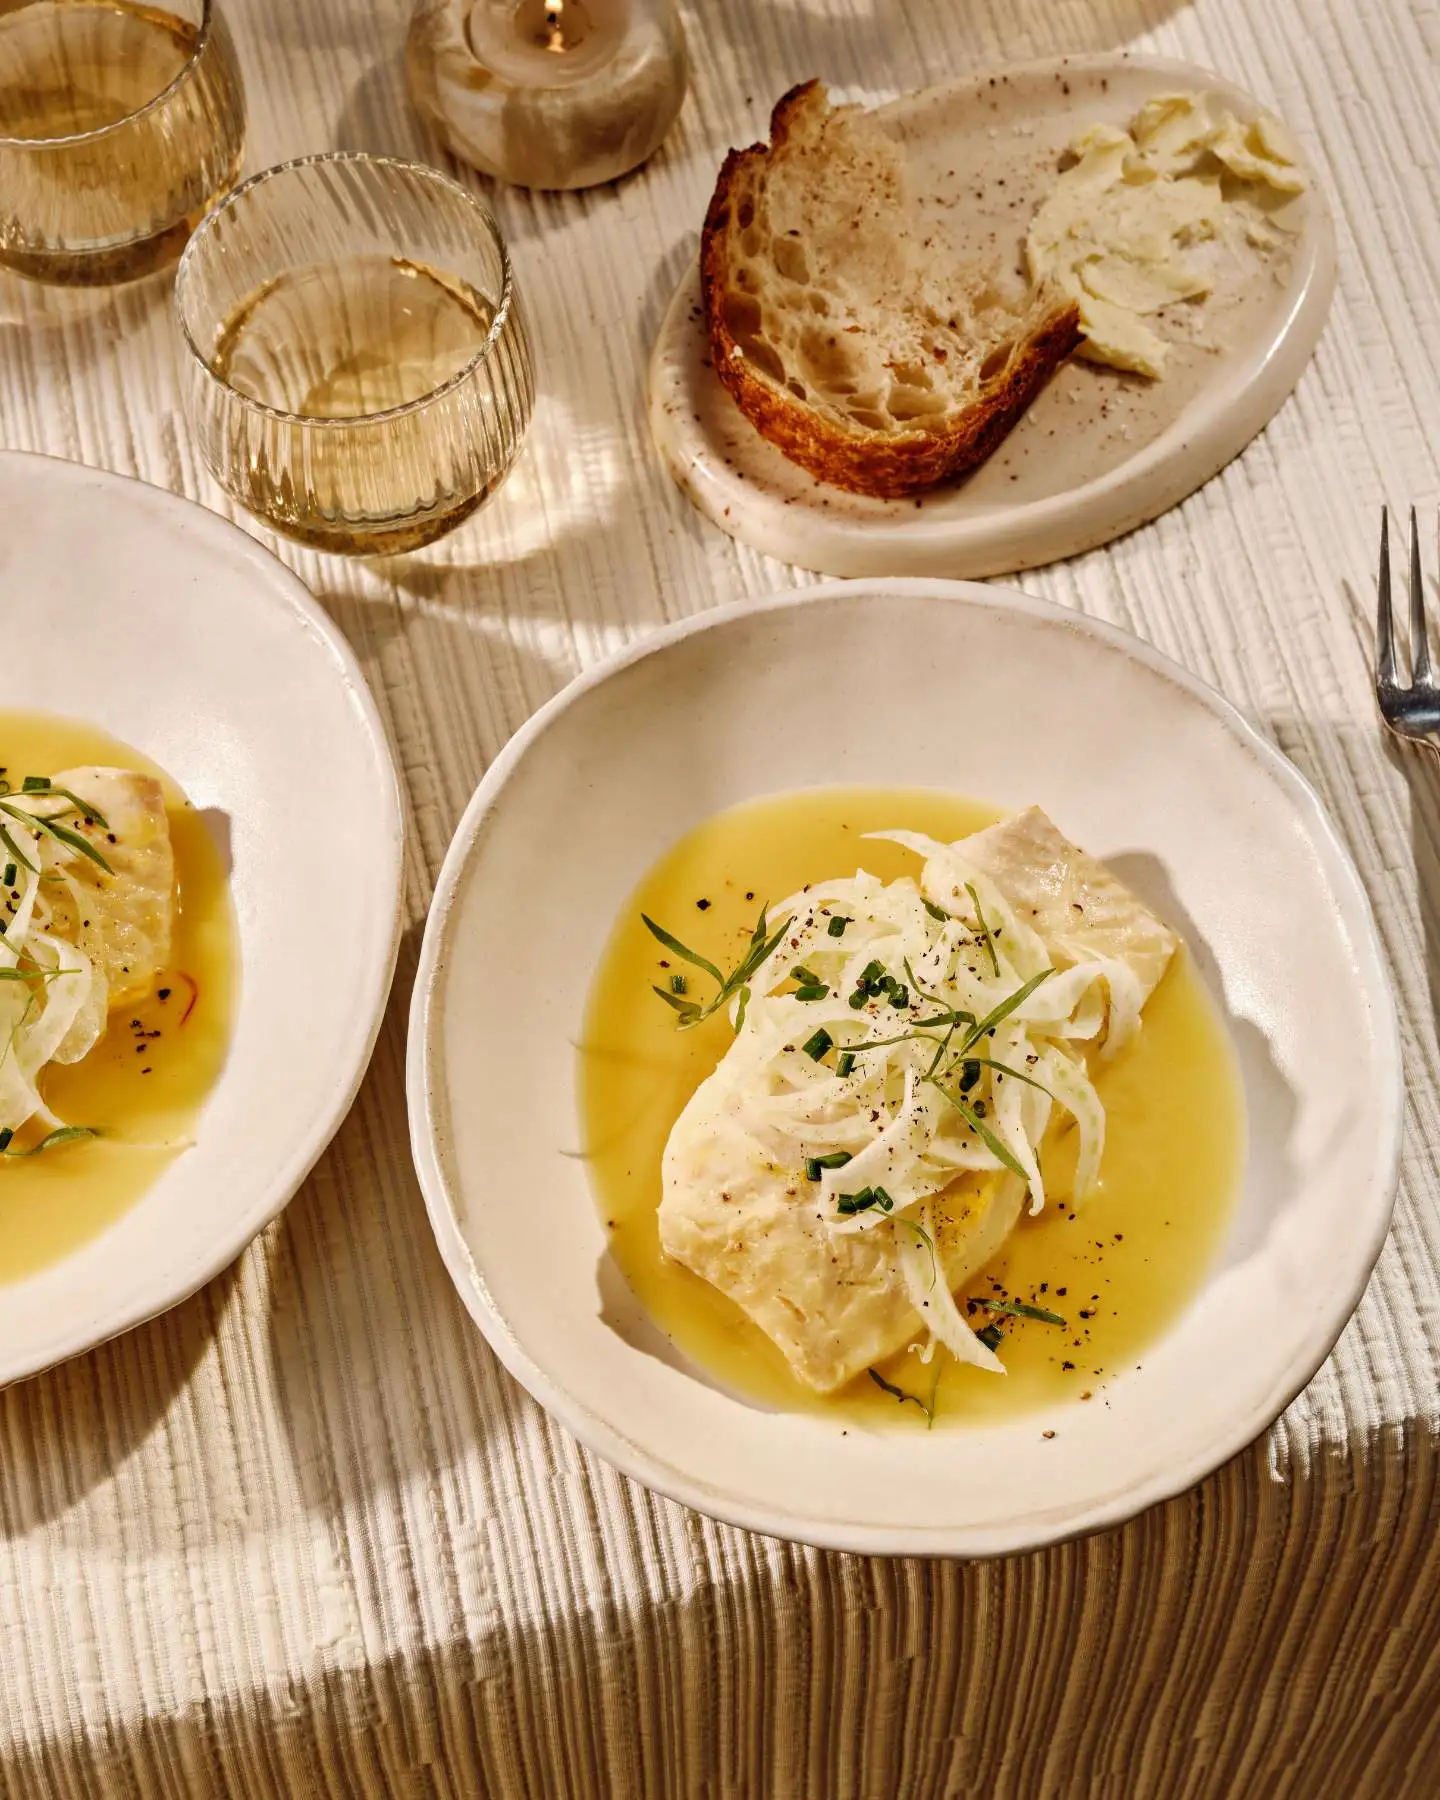 Poached Halibut with Buttered Broth recipe by Casa de Suna; Healthy Meals for Winter